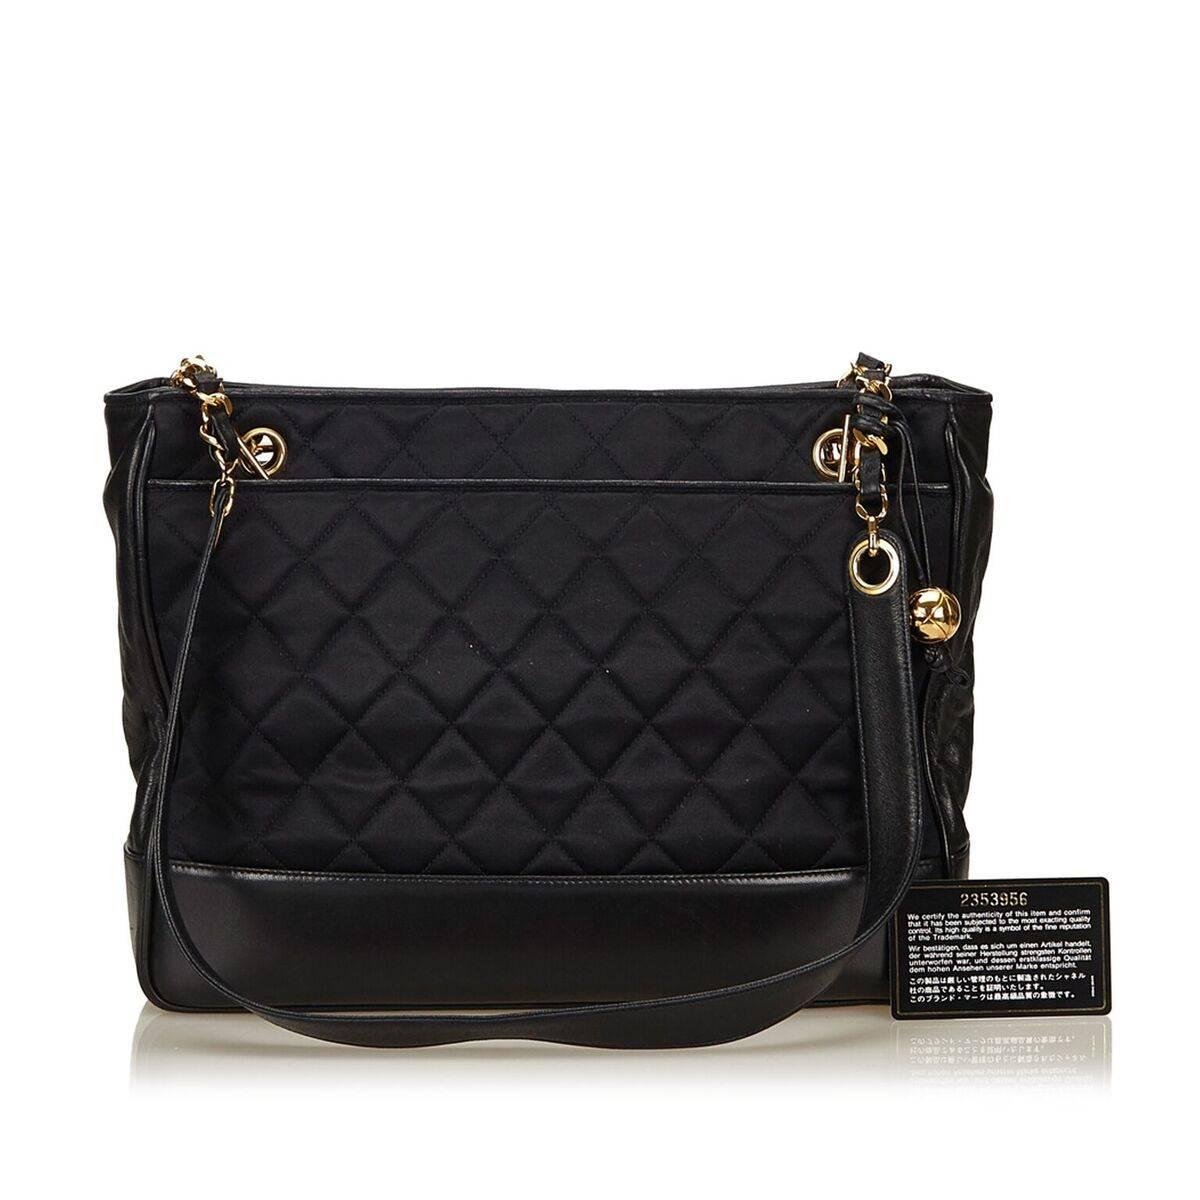 Product details:  Black quilted nylon shoulder bag by Chanel.  Trimmed with leather.  Top magnetic snap closure.  Leather lined interior with inner zip pocket.  Goldtone hardware.  Authenticity card included. 13